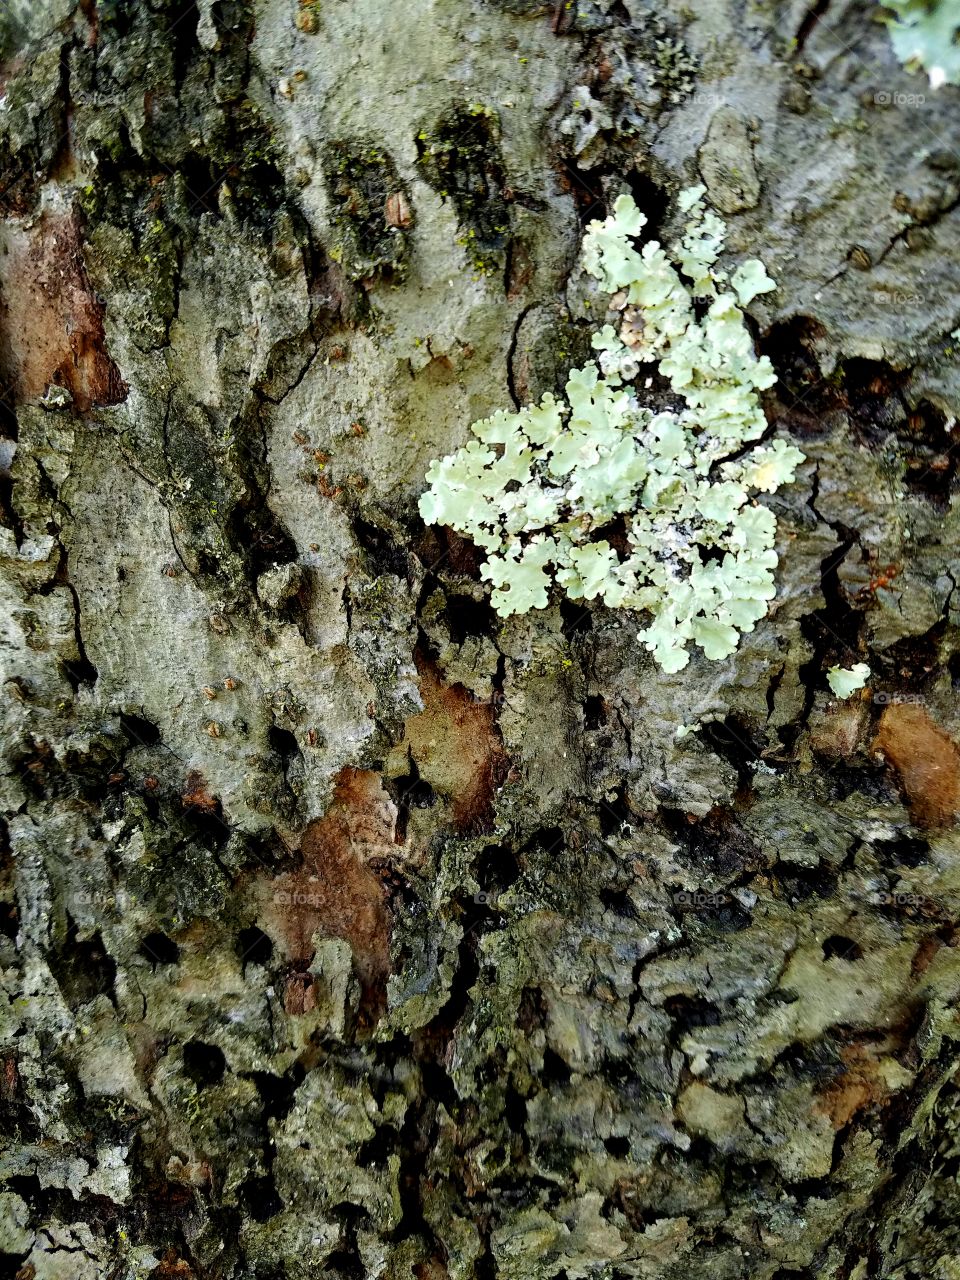 Bark riddled with holes and lichen